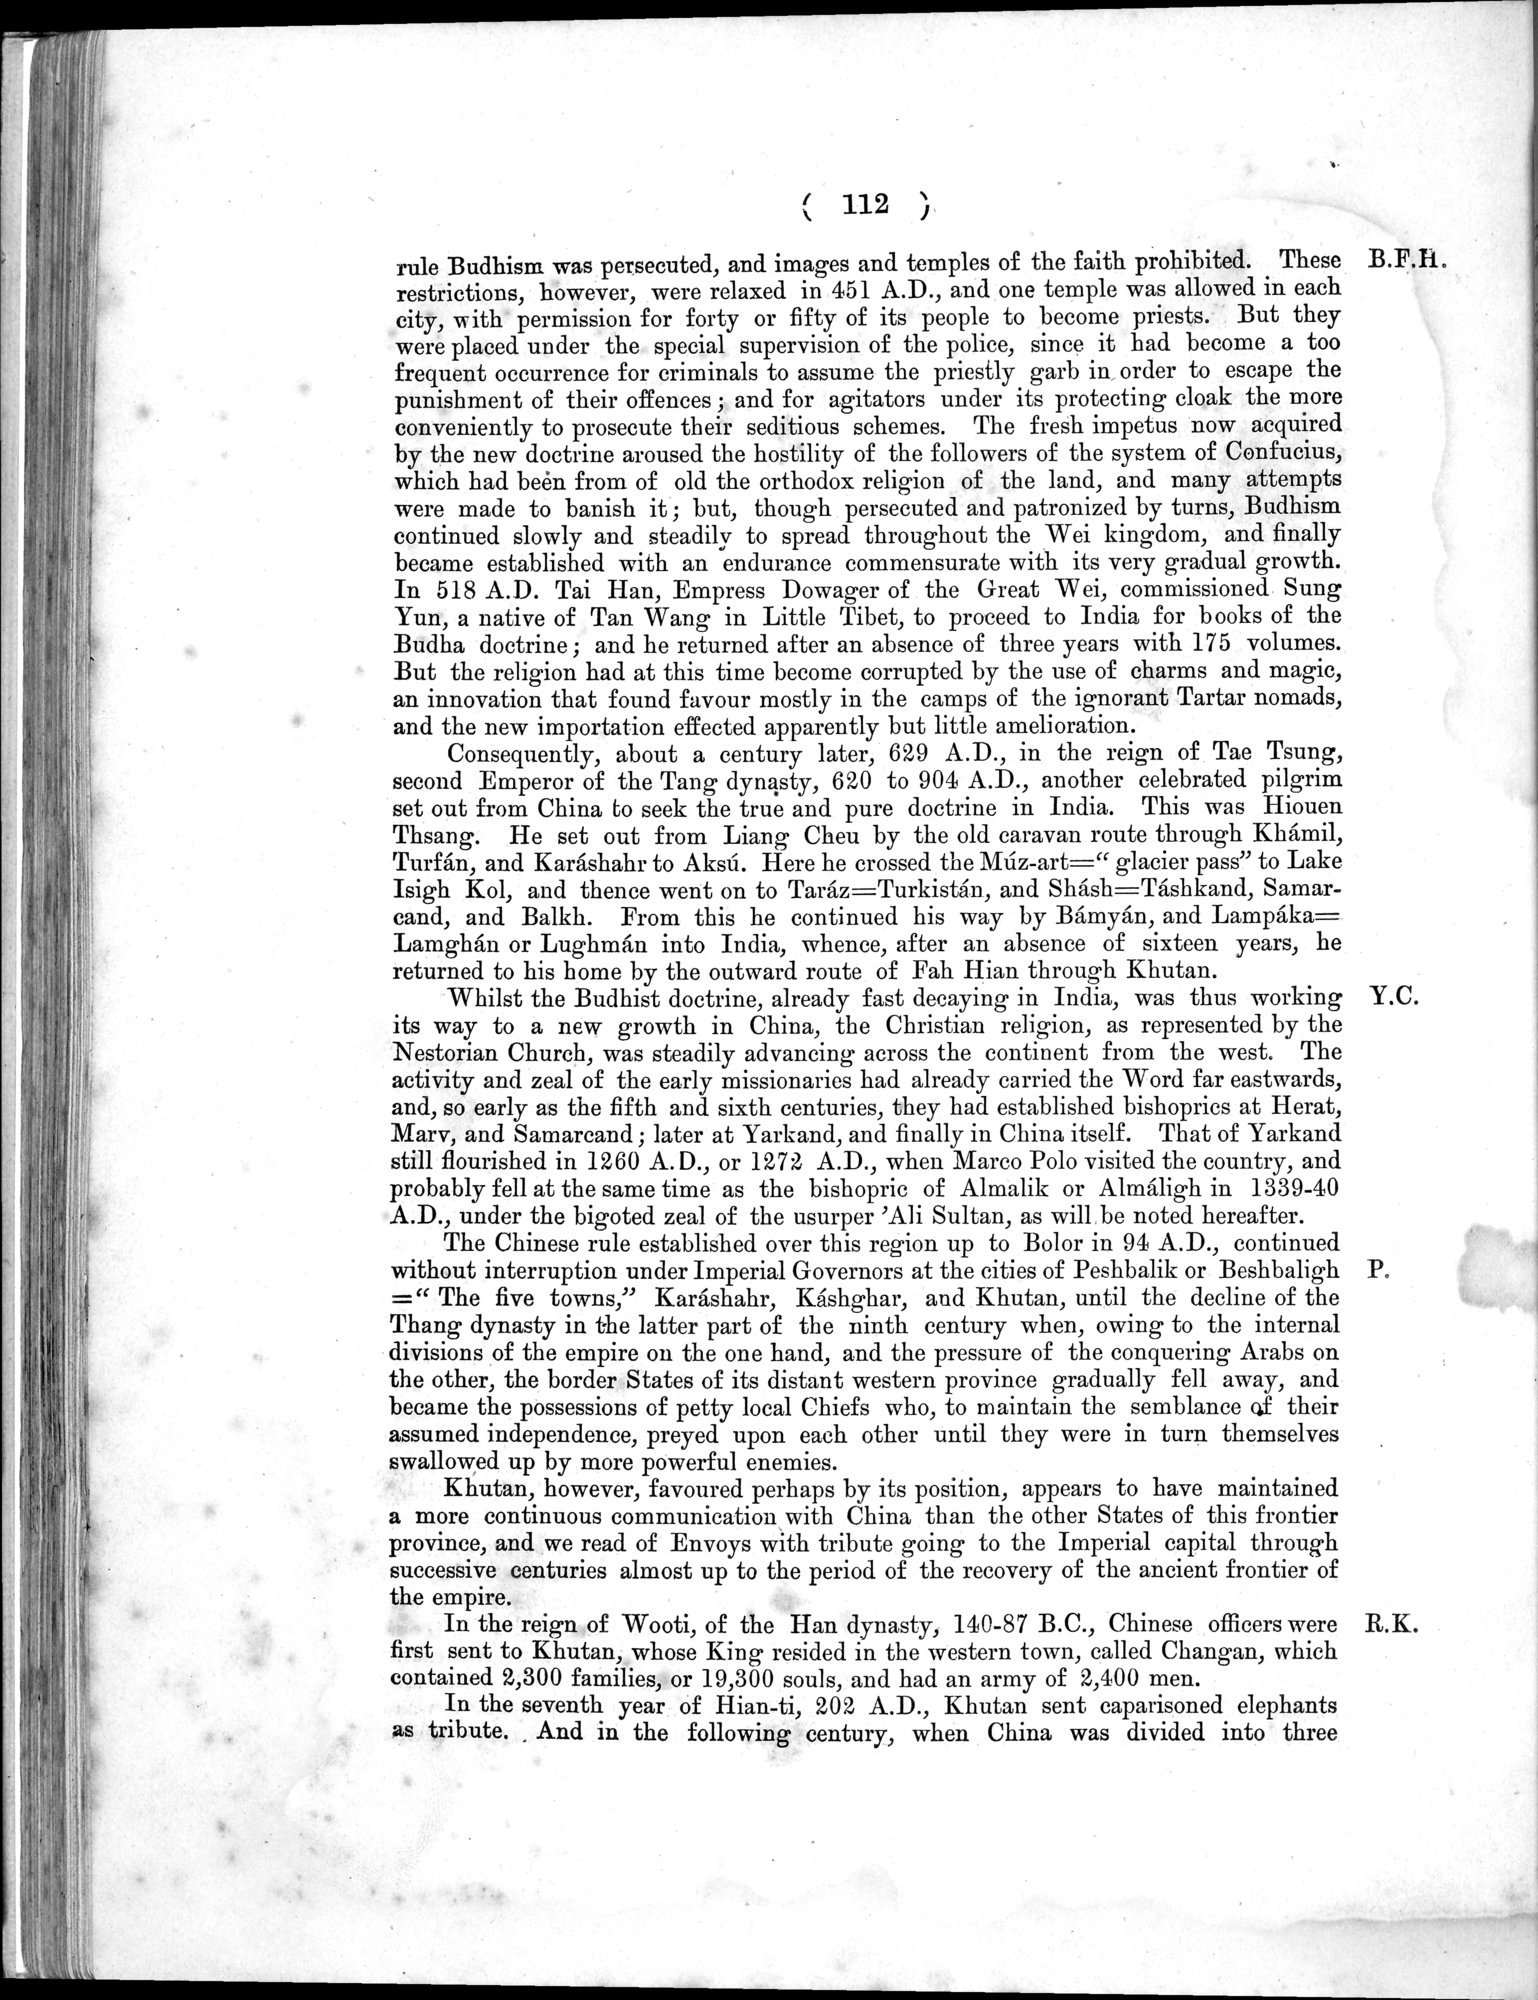 Report of a Mission to Yarkund in 1873 : vol.1 / Page 172 (Grayscale High Resolution Image)